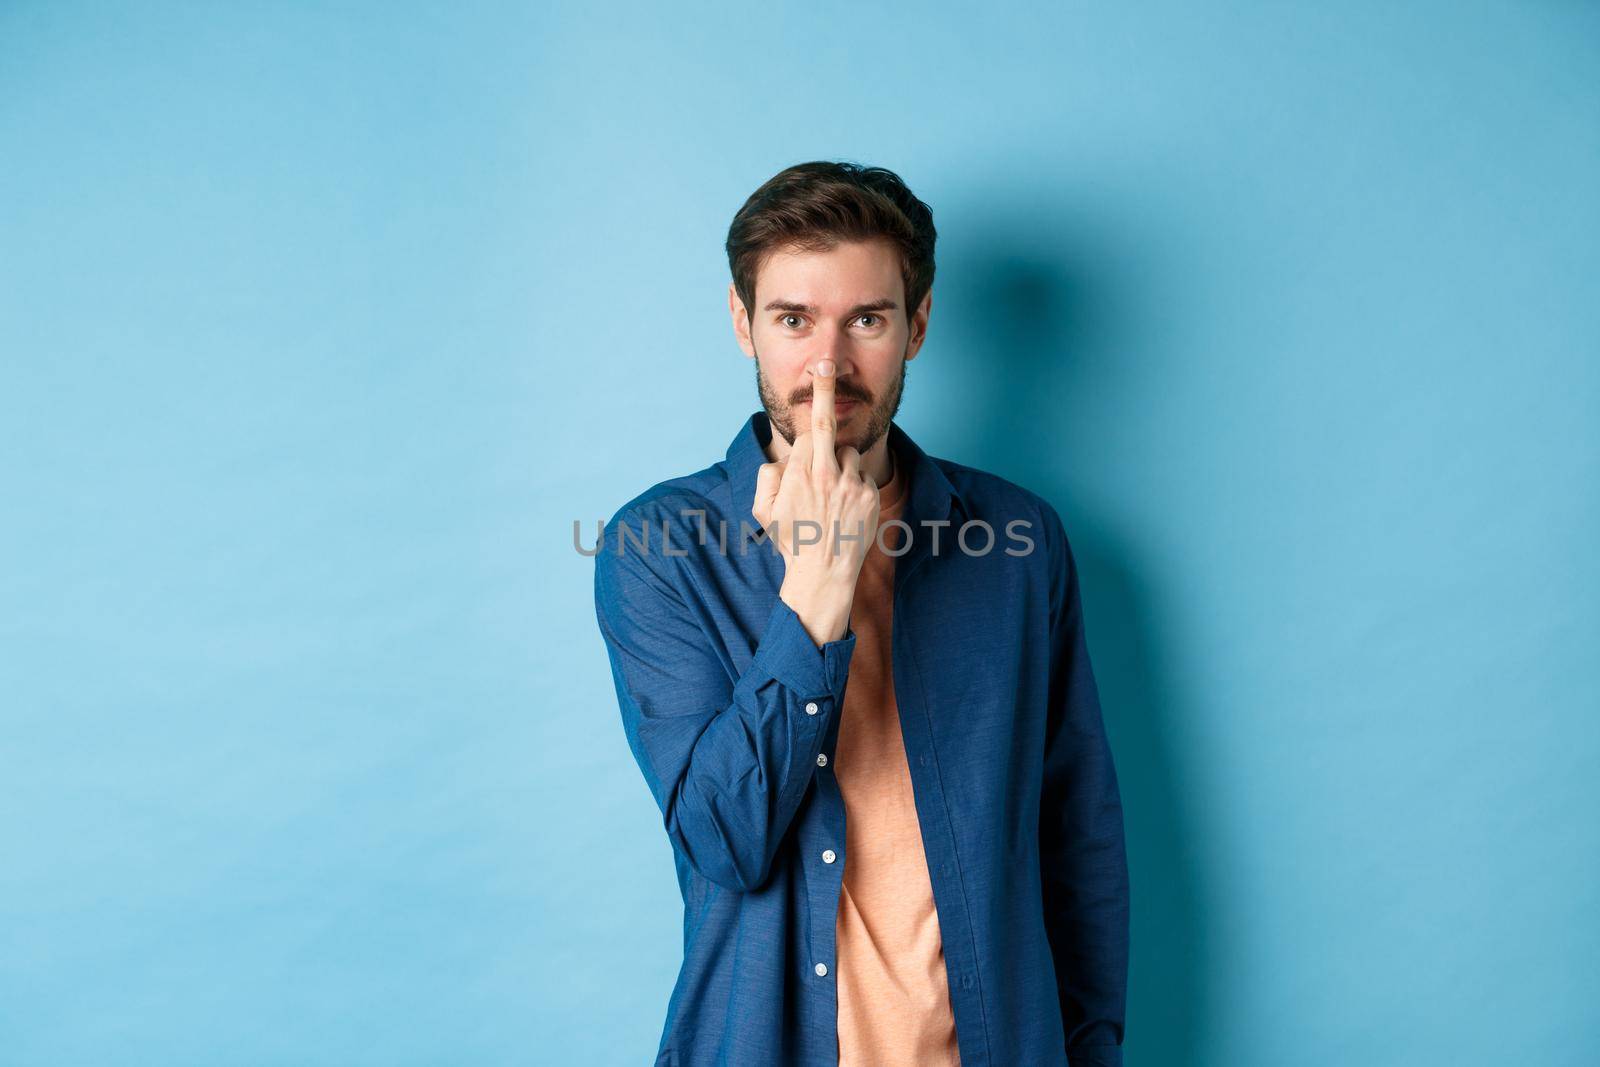 Ignorant and rude guy showing middle finger and smiling, say fuck you, standing on blue background.